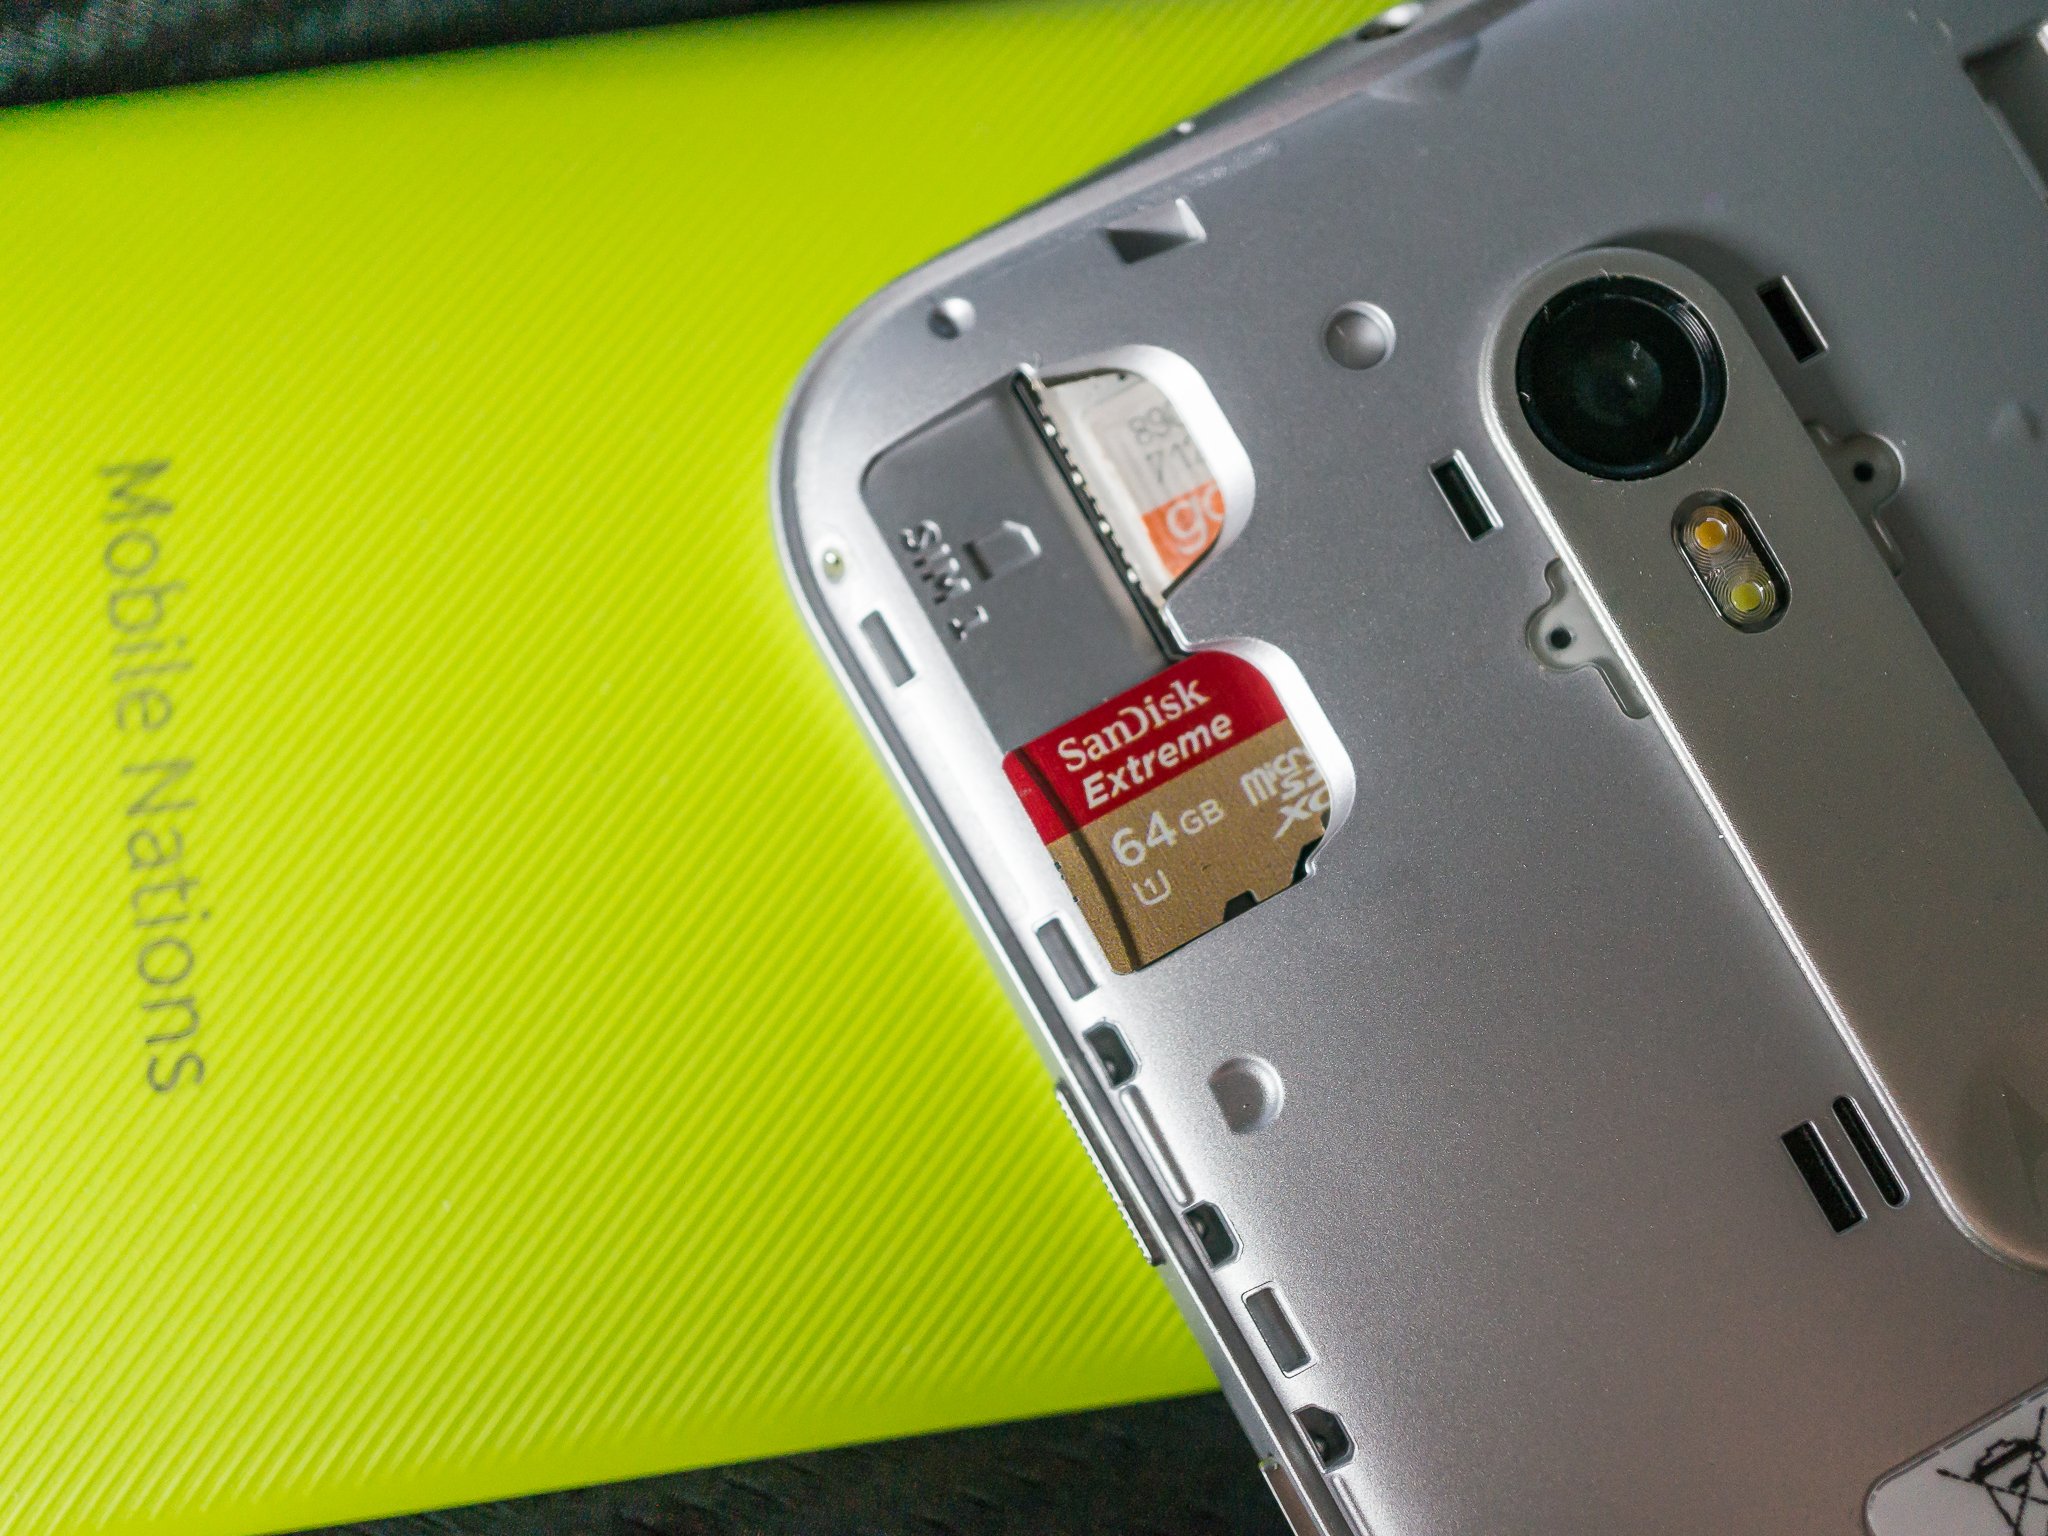 The Moto G 2015 and SD cards everything you need to know